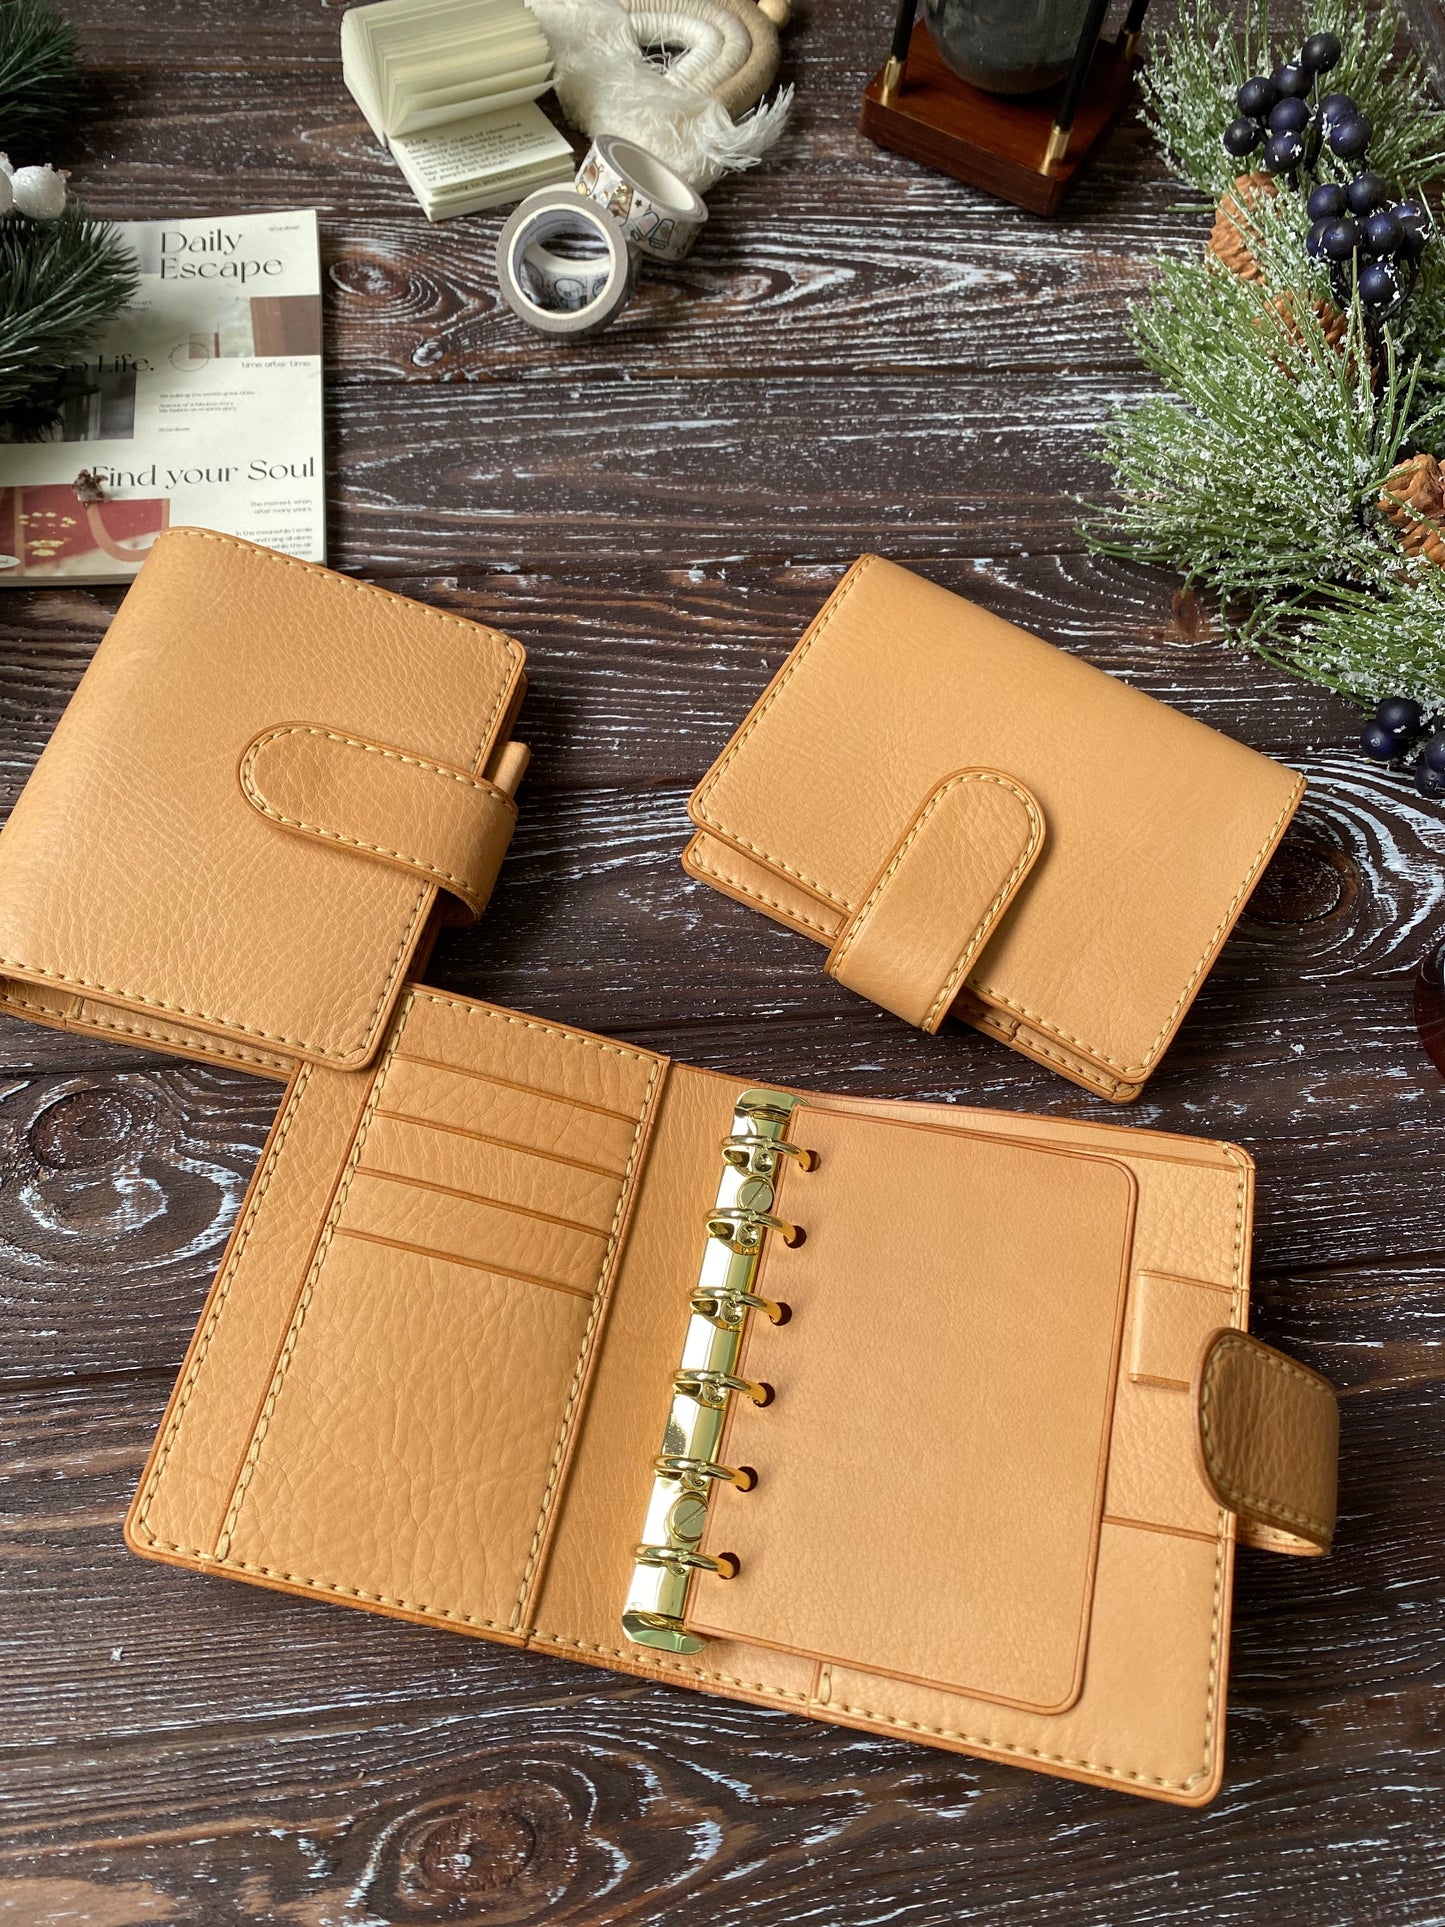 Pocket rings cover in Country leather with back pocket